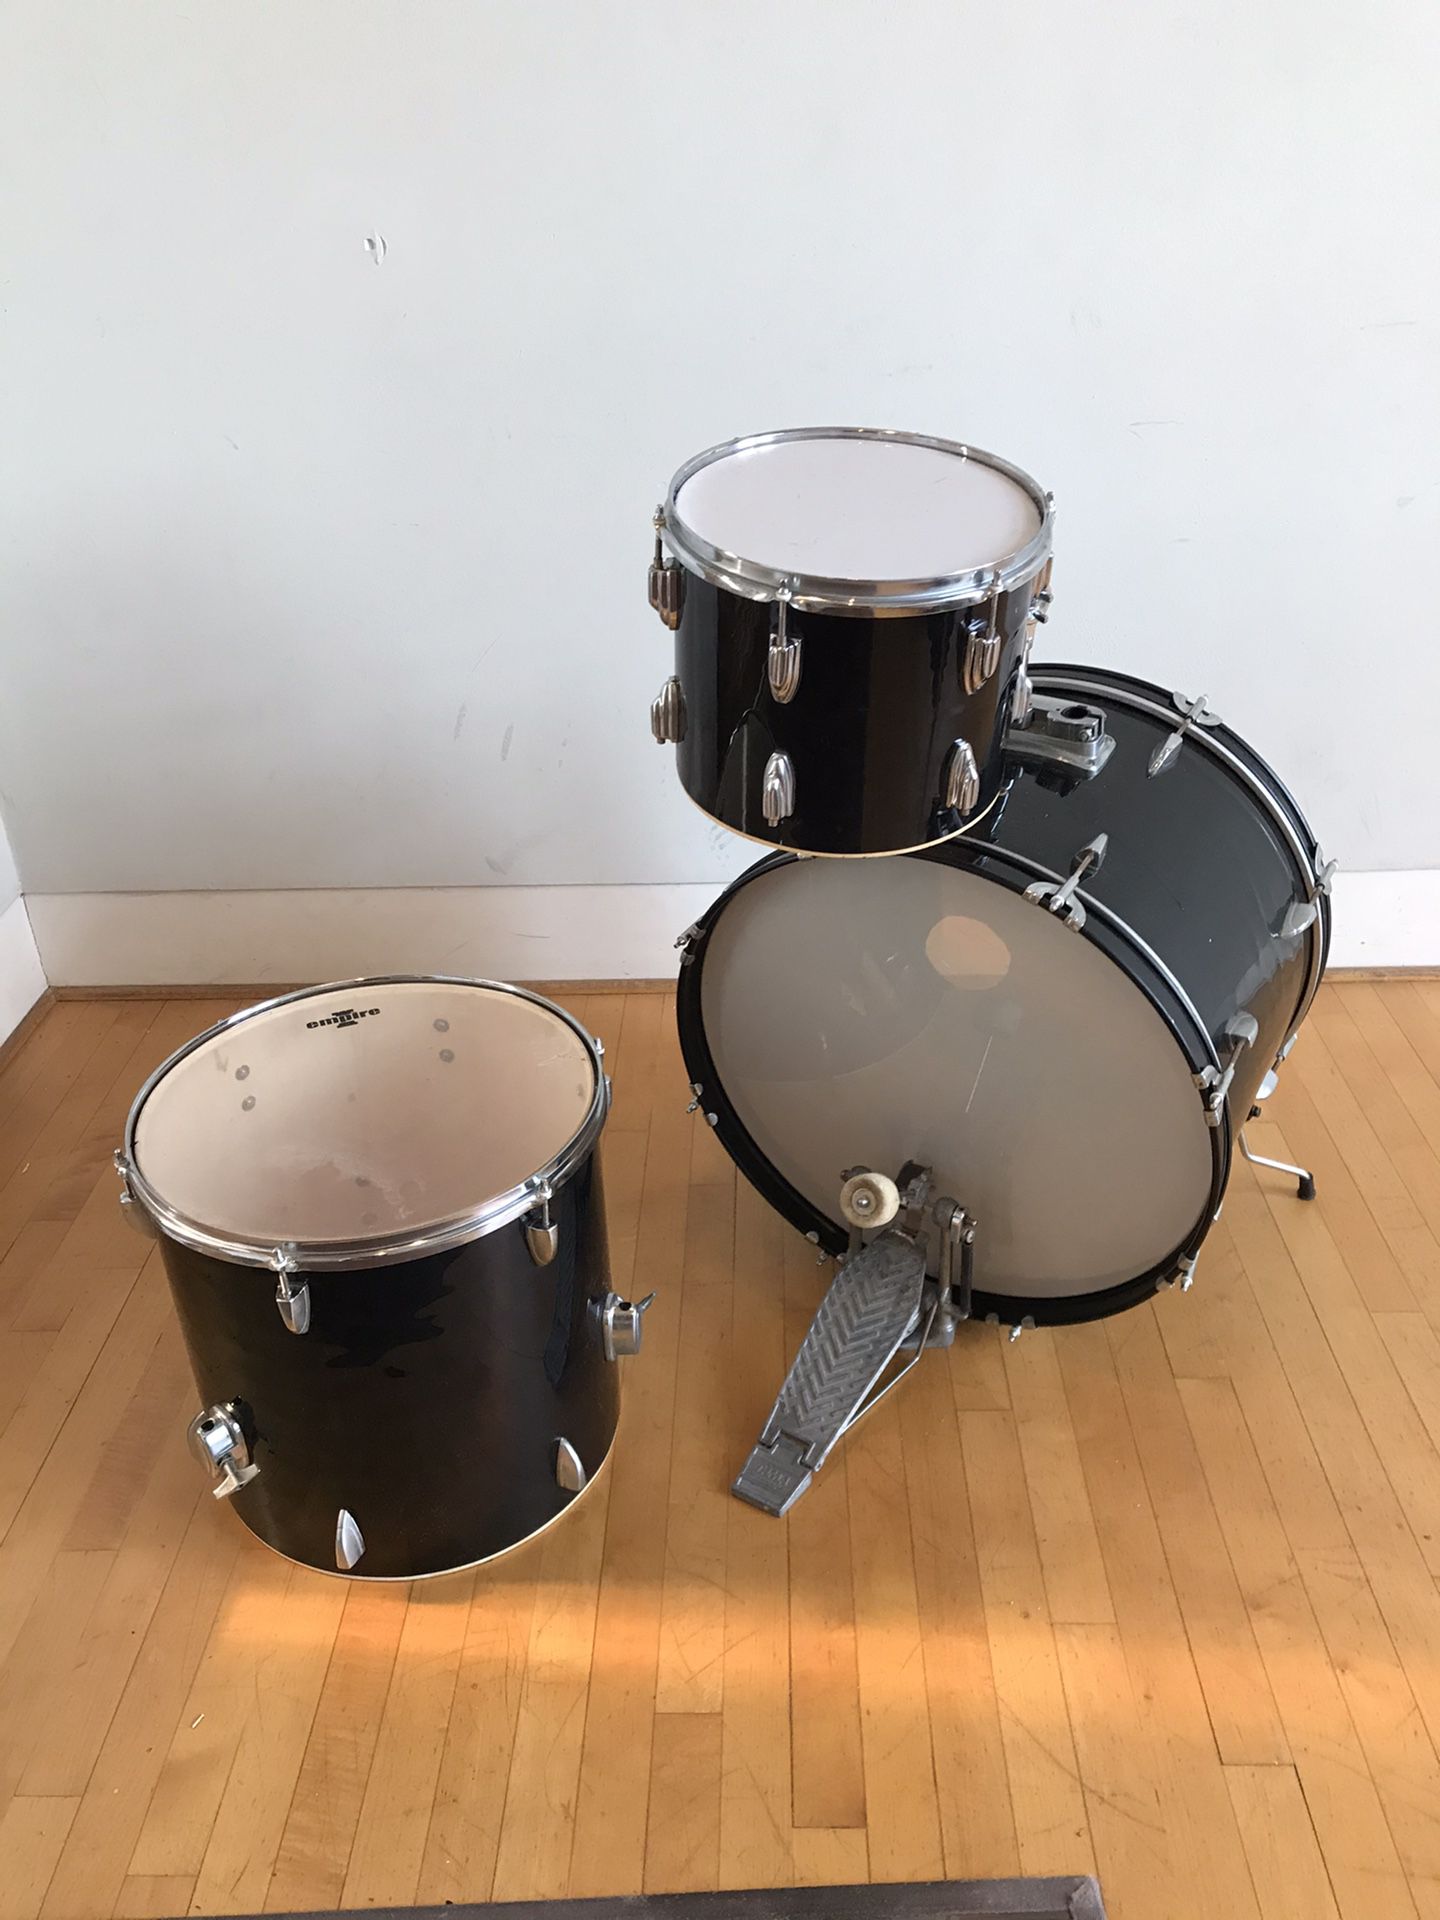 Groove percussion 22 inch bass drum black finish 12 inch ride Tom 16 inch floor Tom Tama bass pedal drums set in Ontario 91762 $75